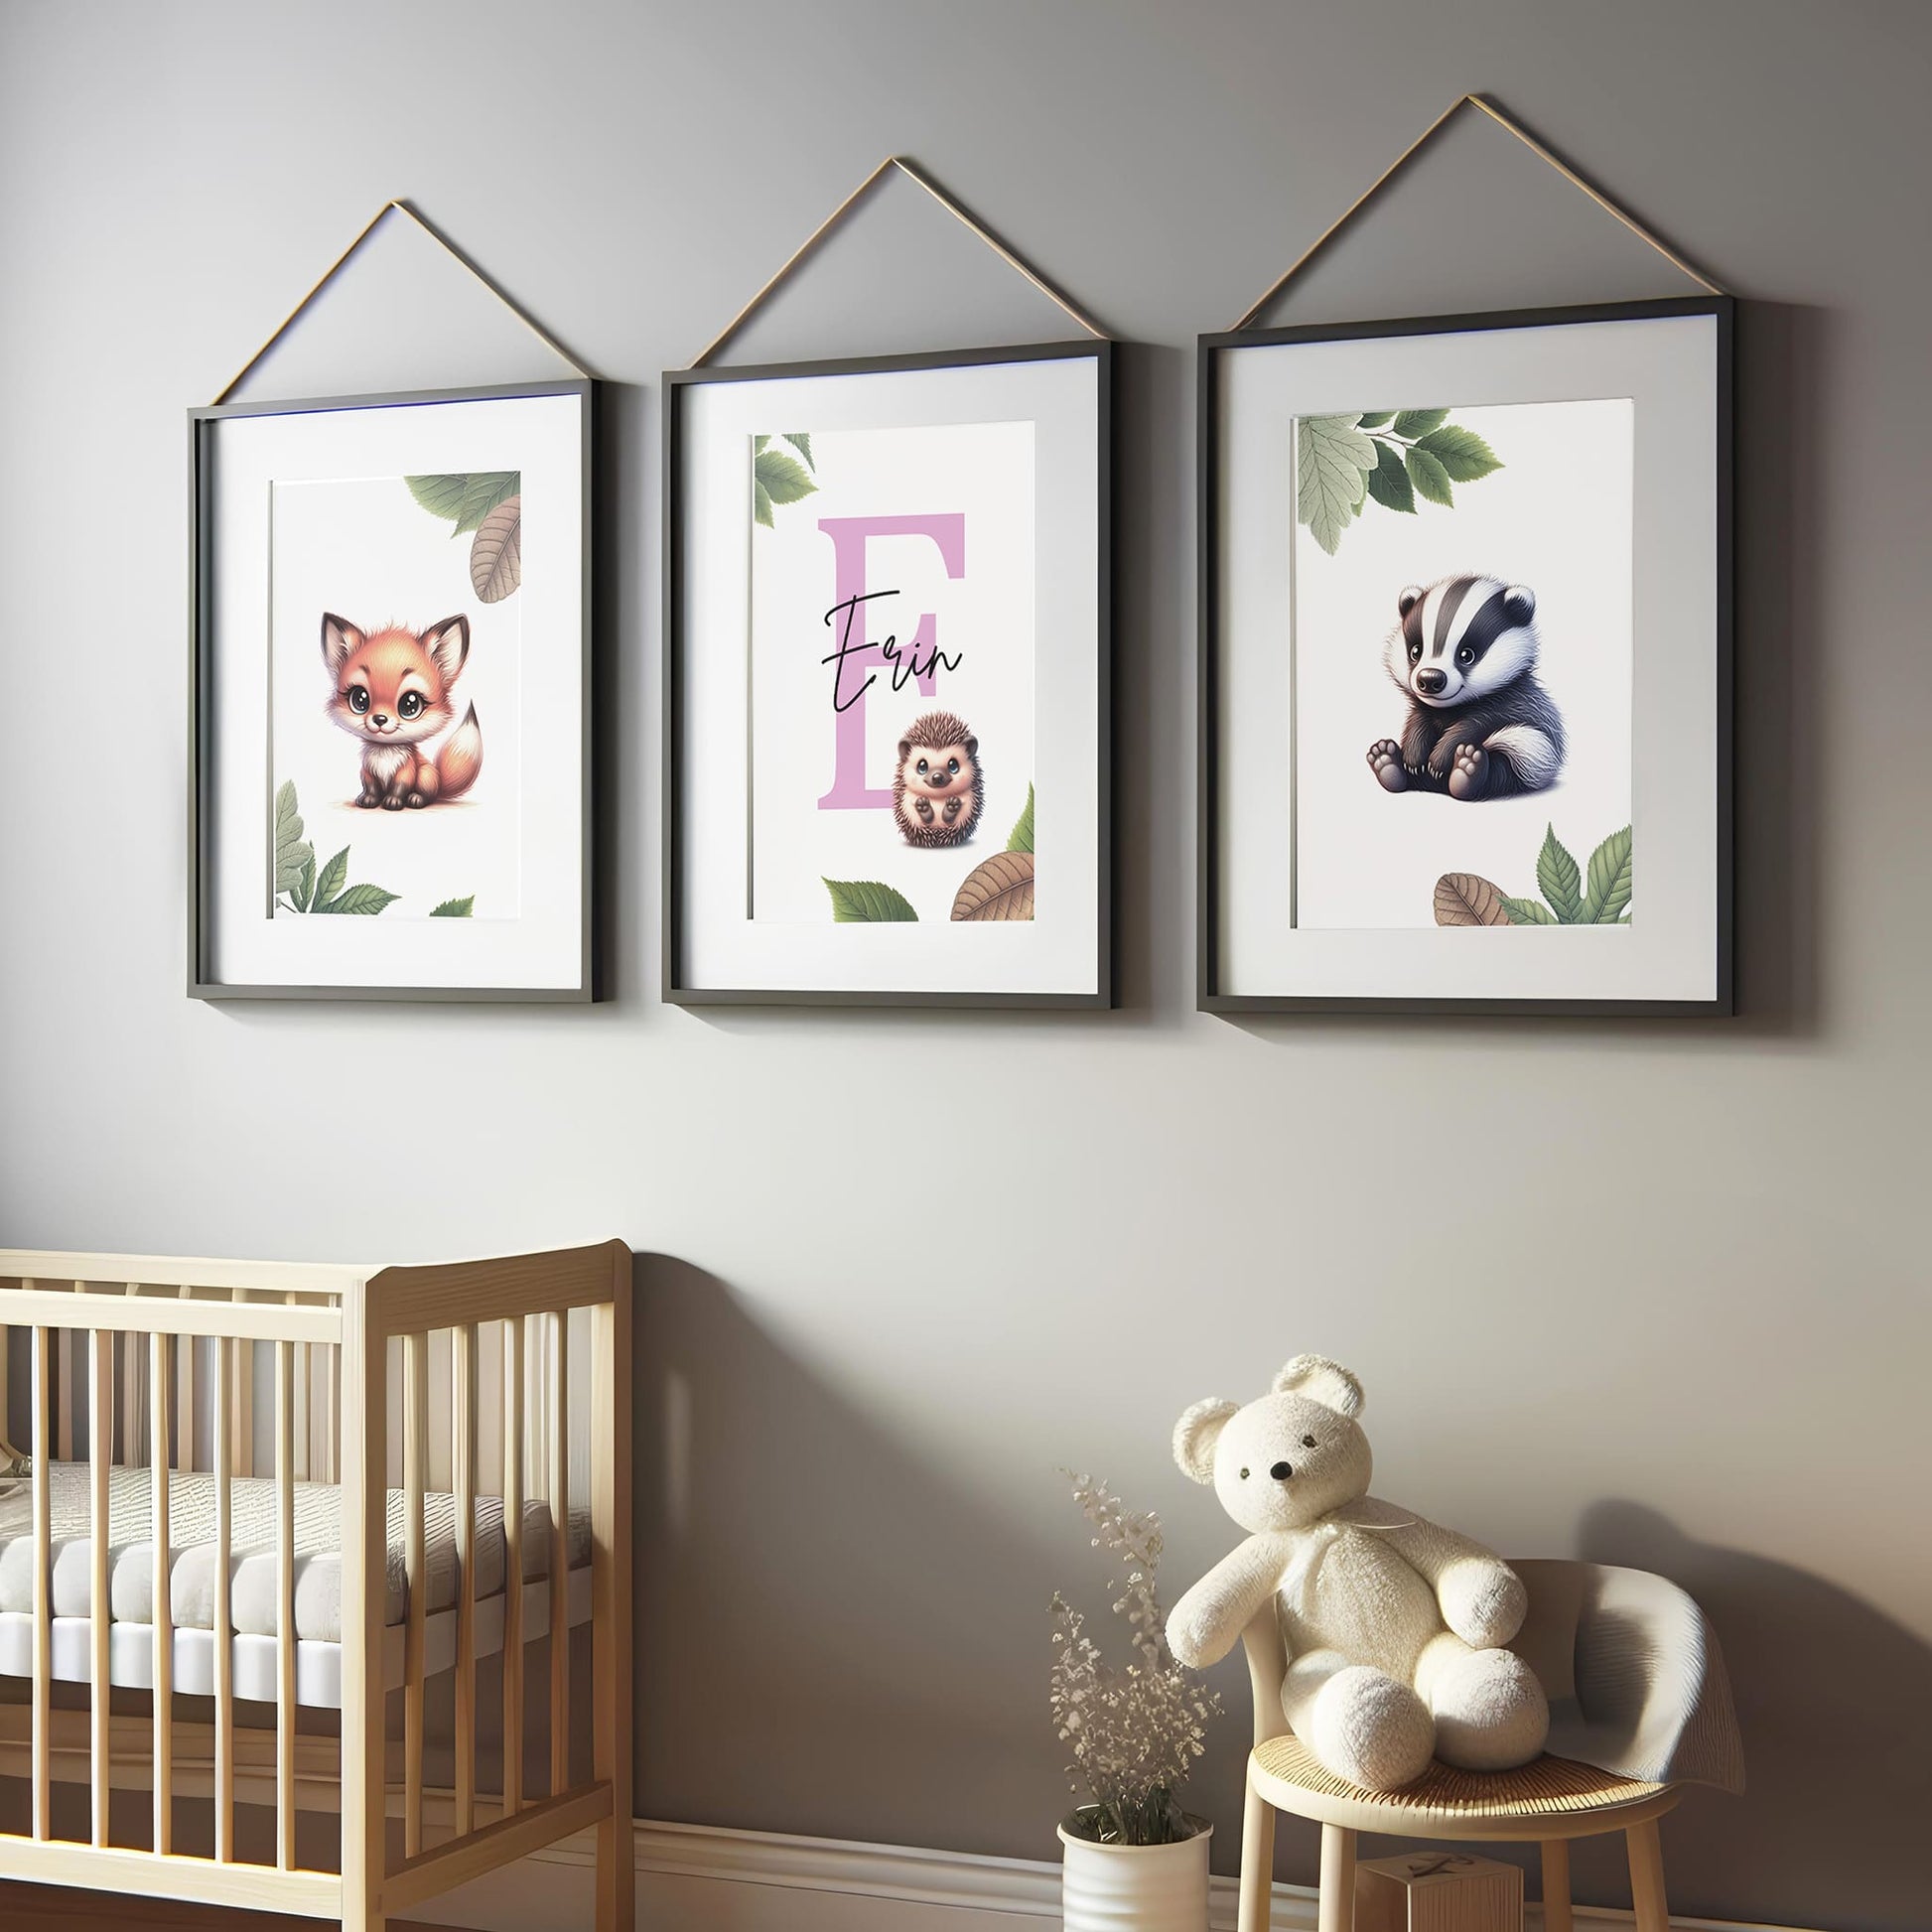 Set of three A4 prints featuring woodland baby animals - fox, badger, and squirrel. The animals are depicted in a cartoony style, resembling coloured pencil drawings. Woodland leaves decorate the edges of the prints. The middle print features a smaller animal than the others, with a large initial letter in the background. A personalised name in black overlays the initial letter.